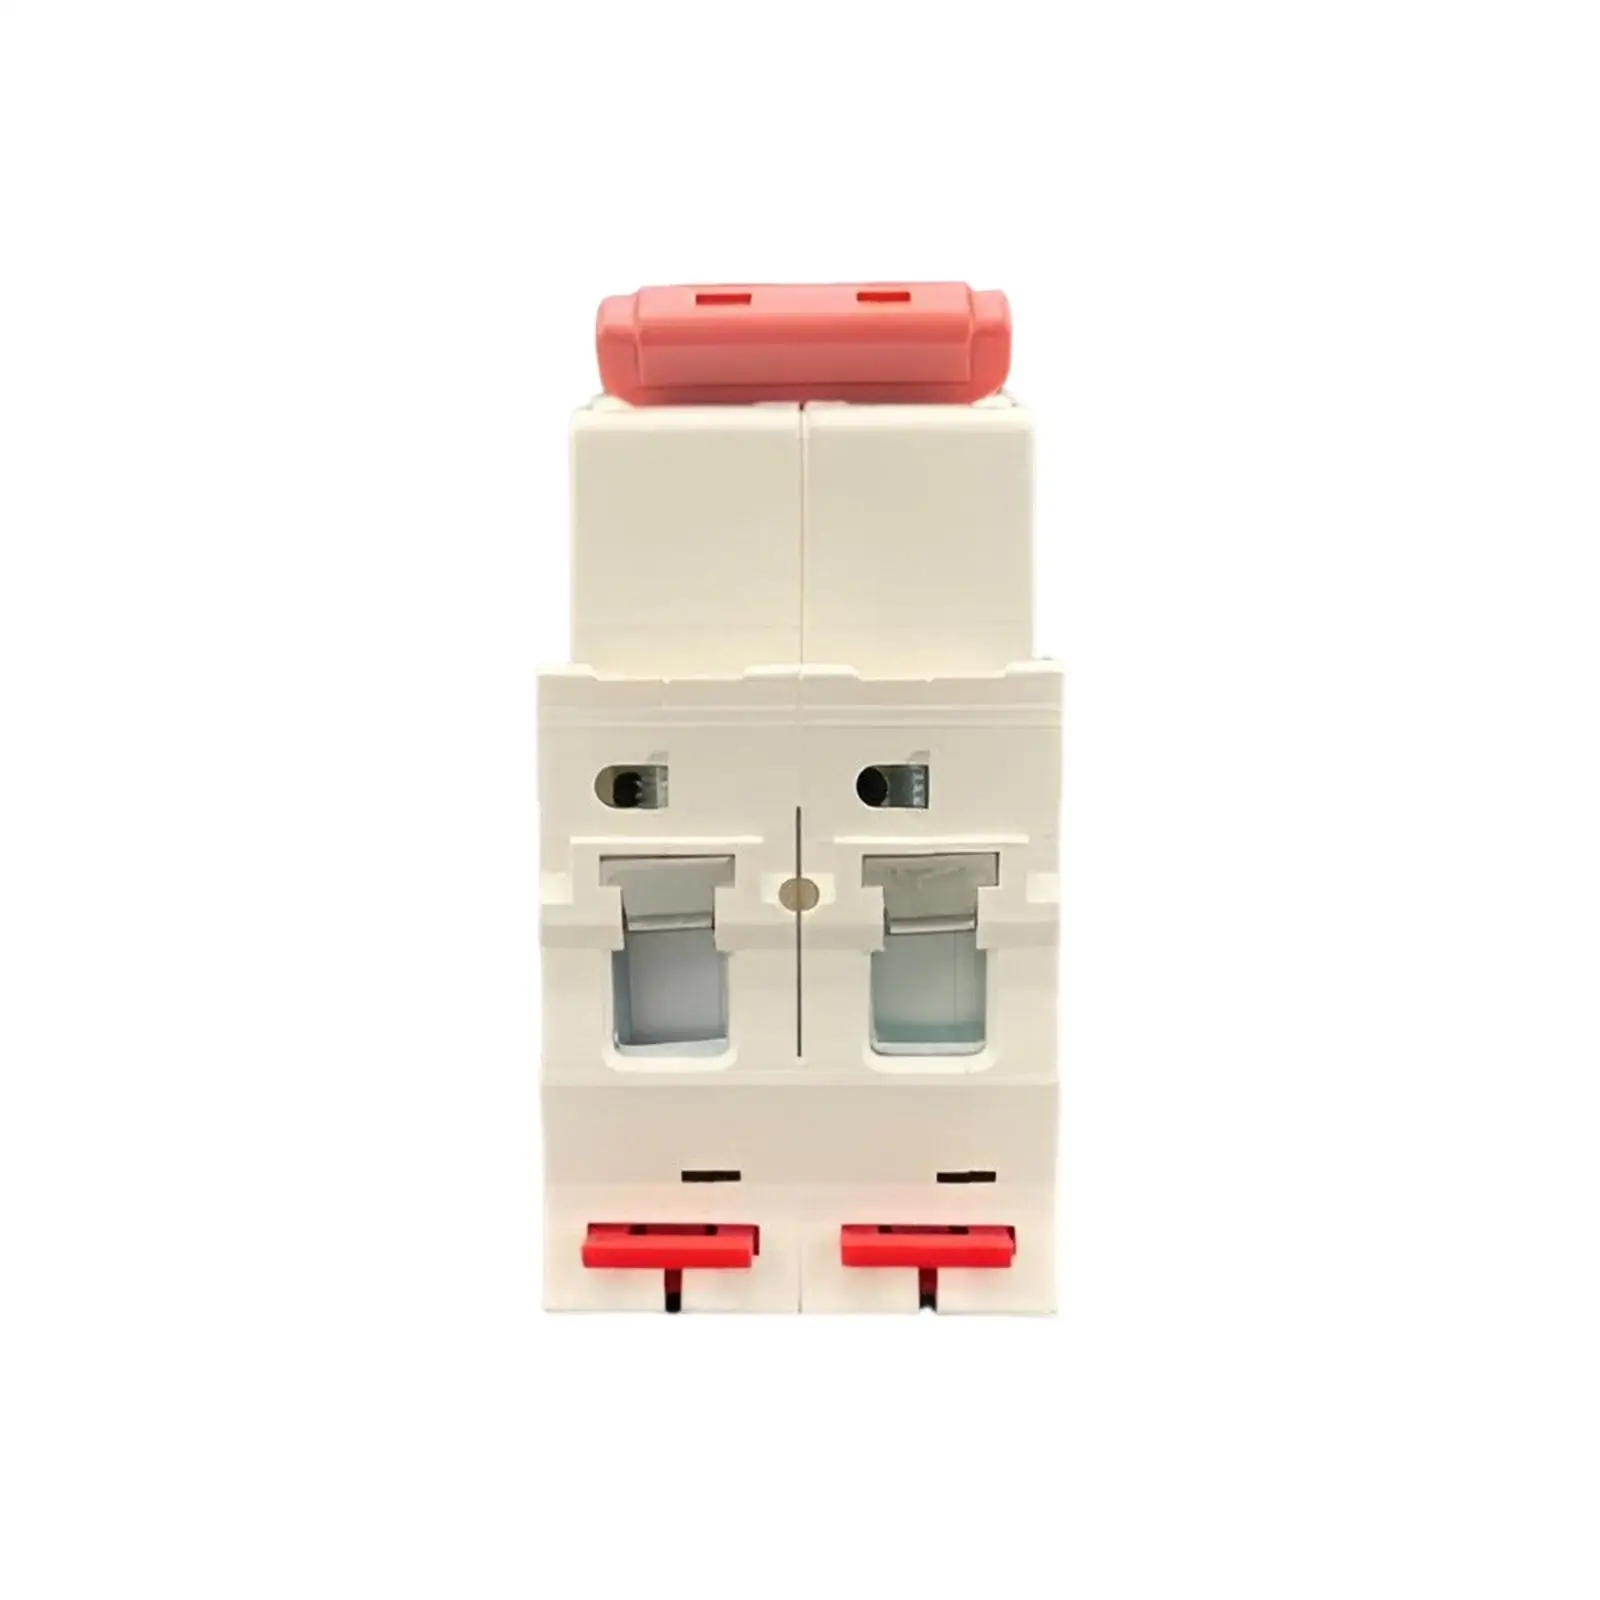 2P 1000V Miniature Circuit Breaker for High Low Voltage Equipment DC Disconnect Switch PV Isolator